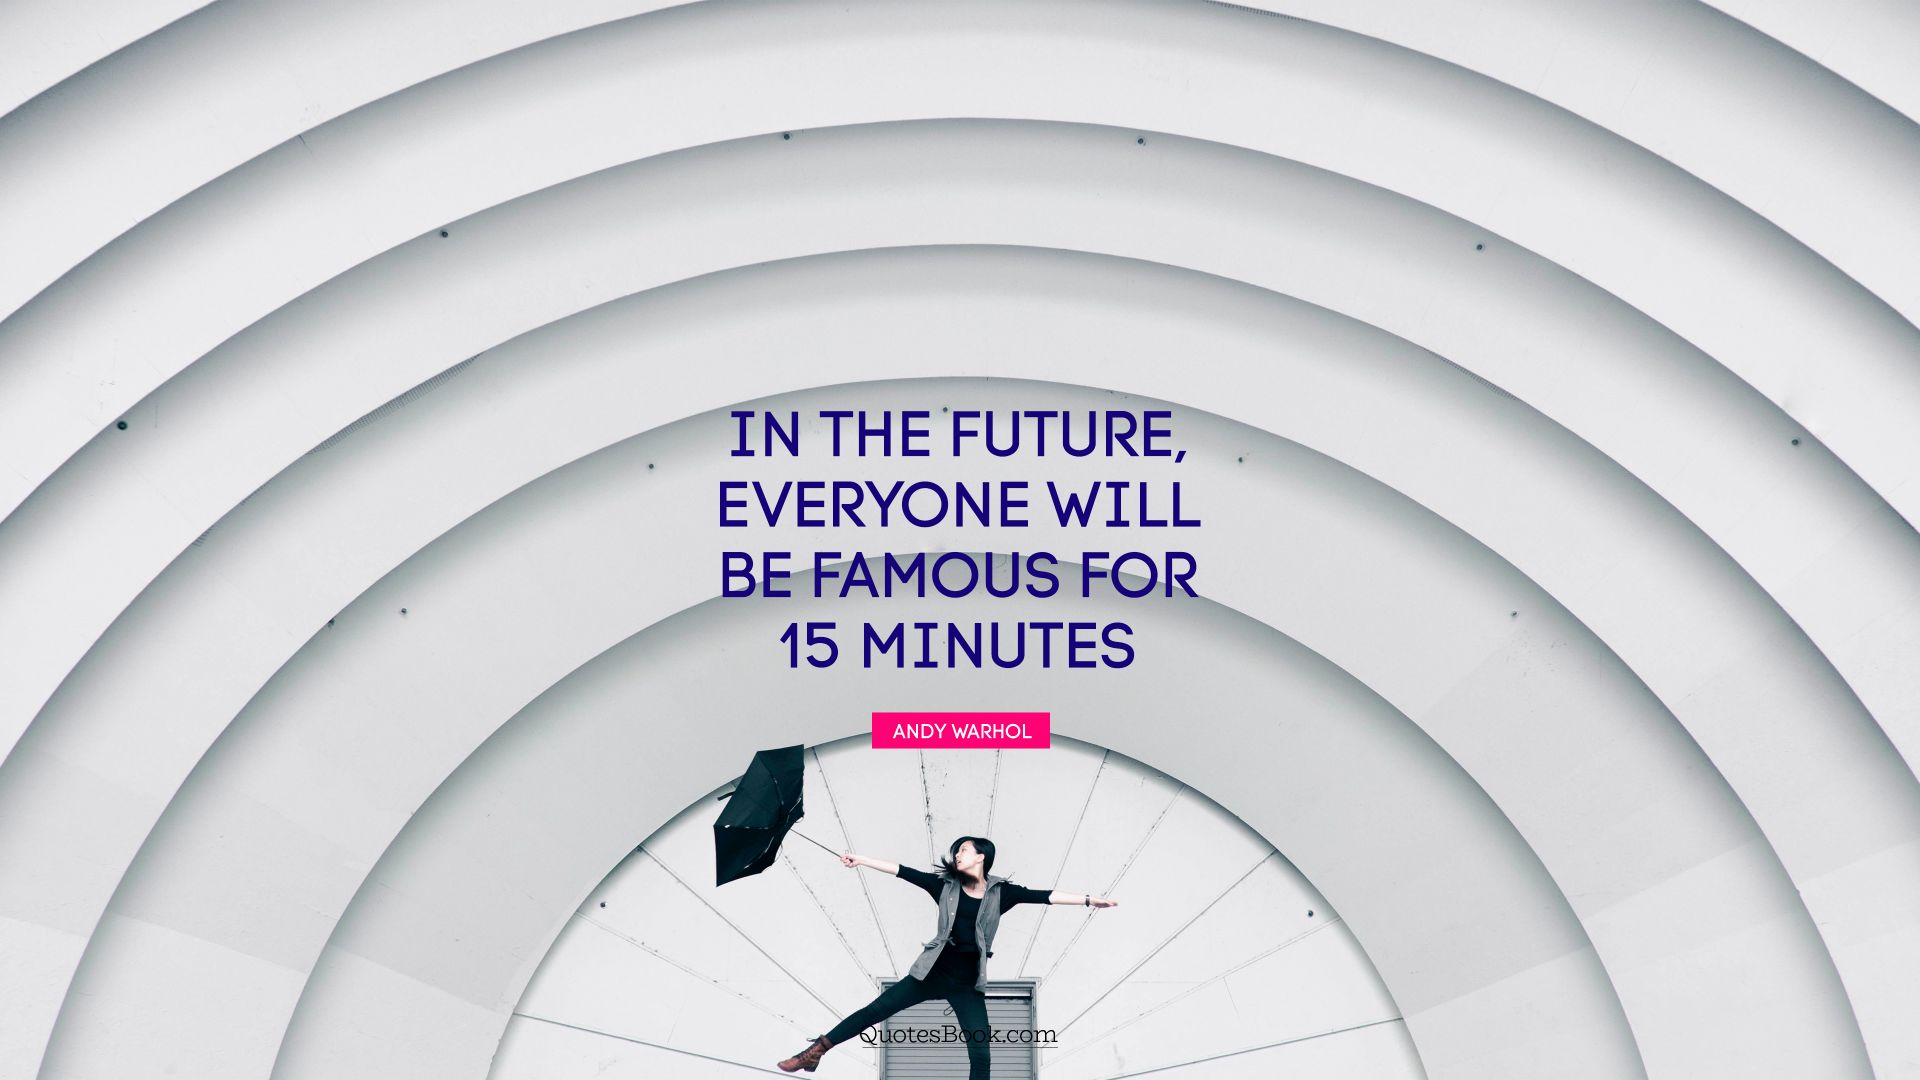 In the future, everyone will be famous for 15 minutes. - Quote by Andy Warhol 